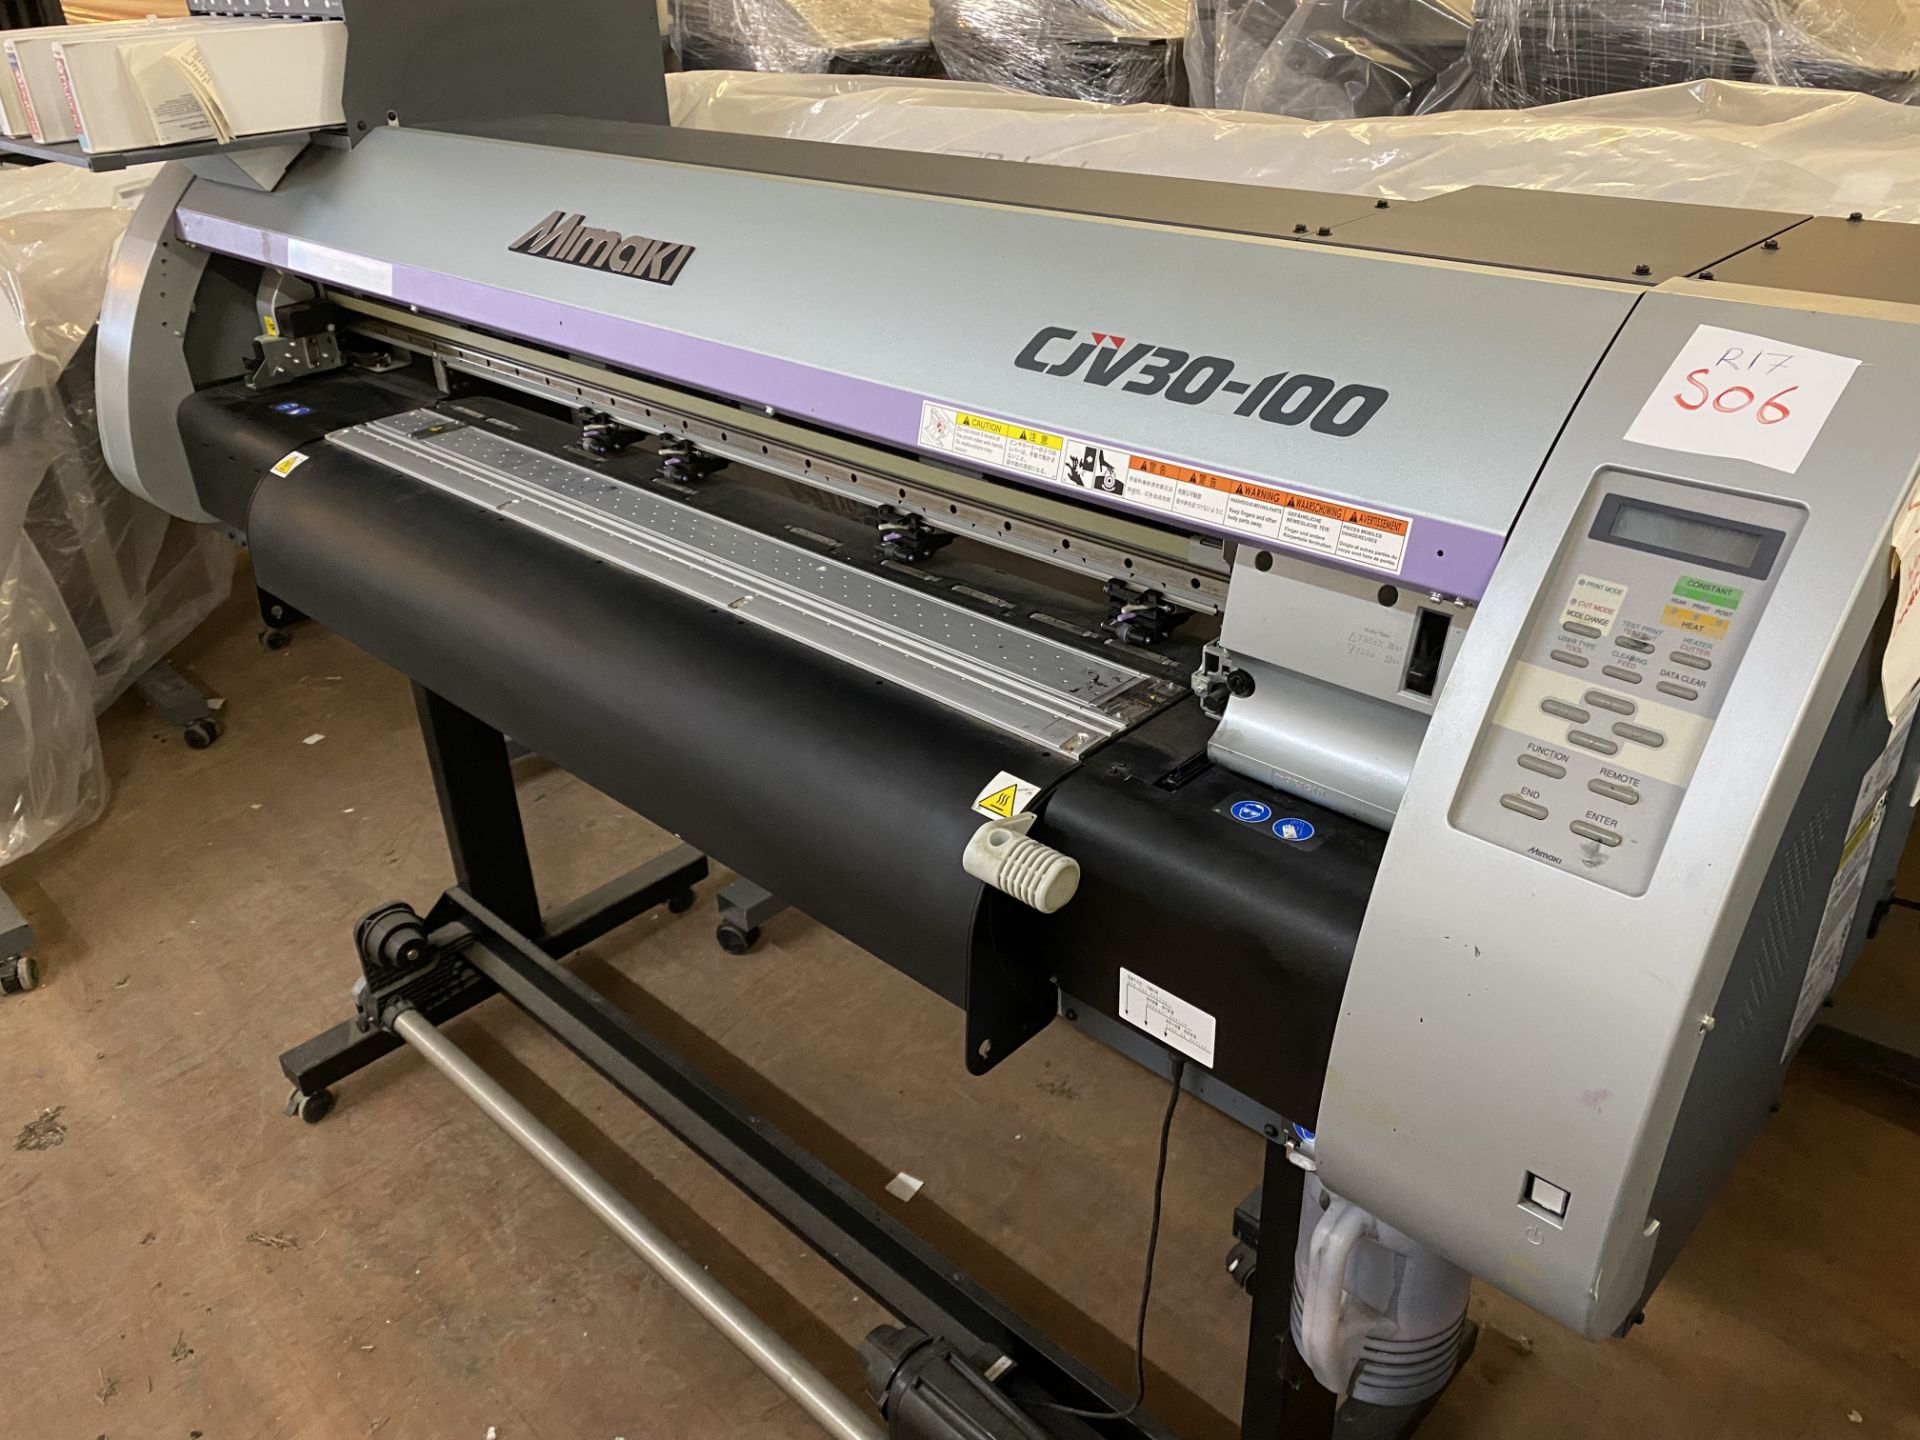 (R17) Mimaki CJV 30-100 Eco Solvent Print And Cut Large Format Printer - Image 2 of 3